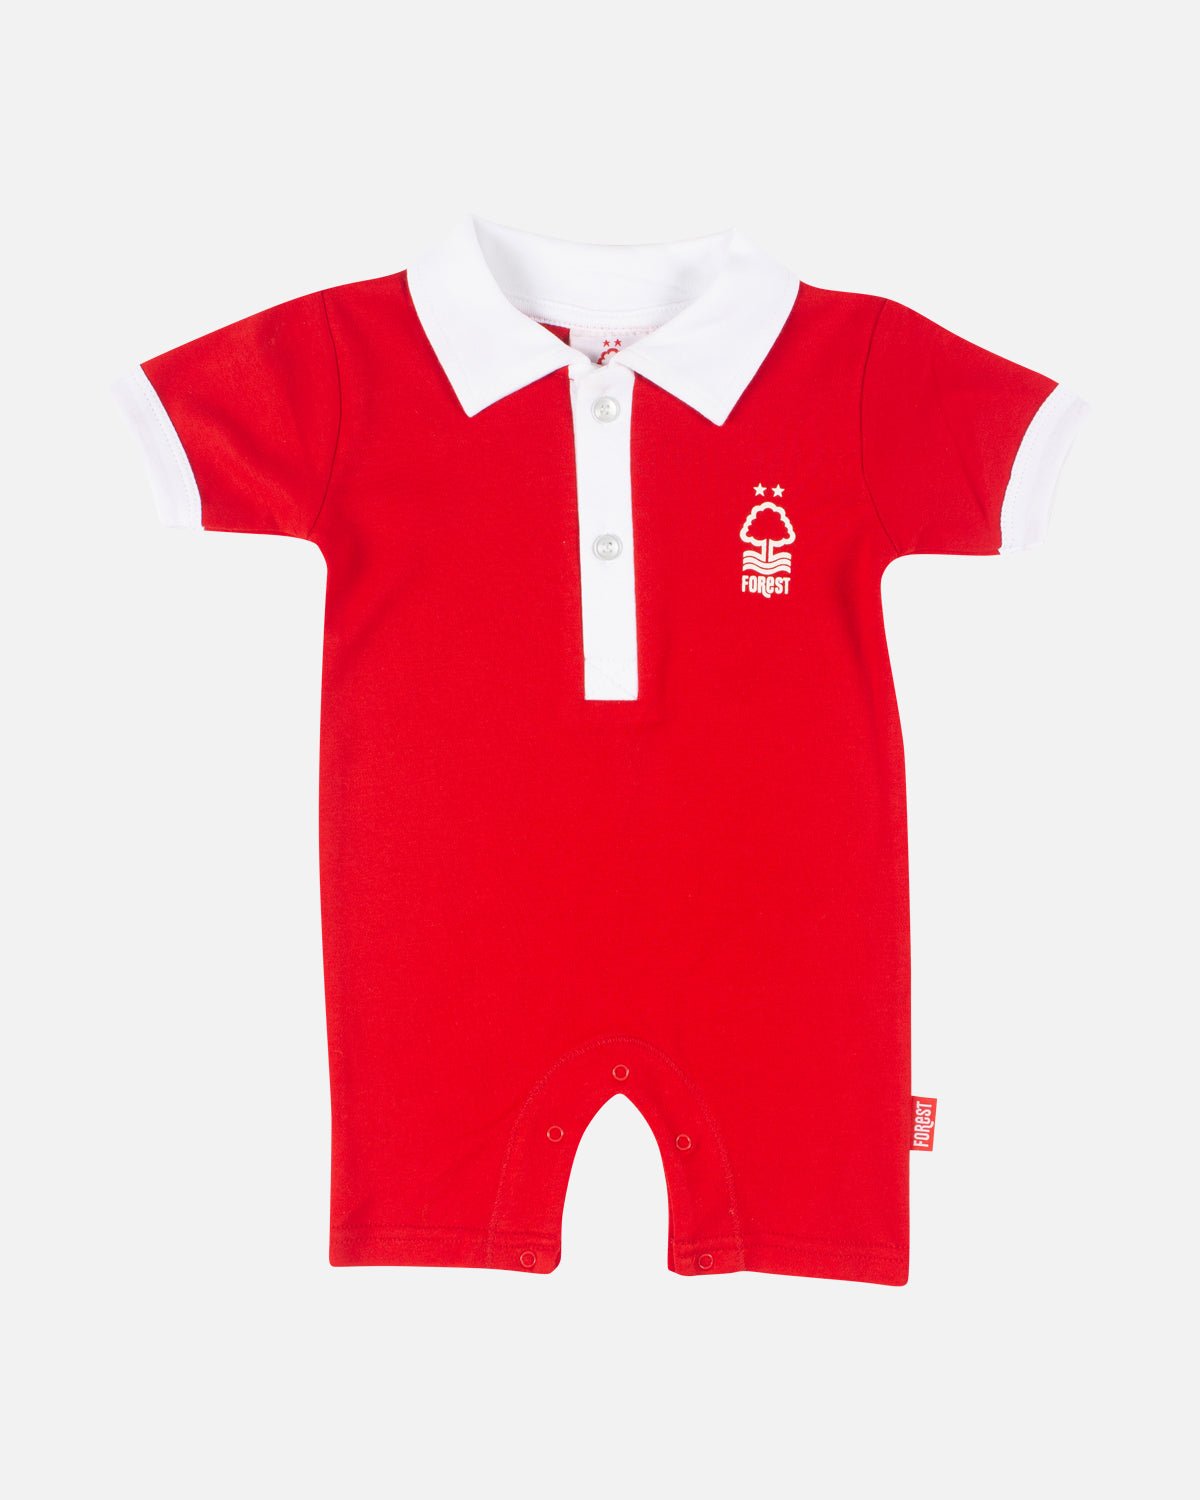 NFFC Red Baby Romper - Nottingham Forest FC